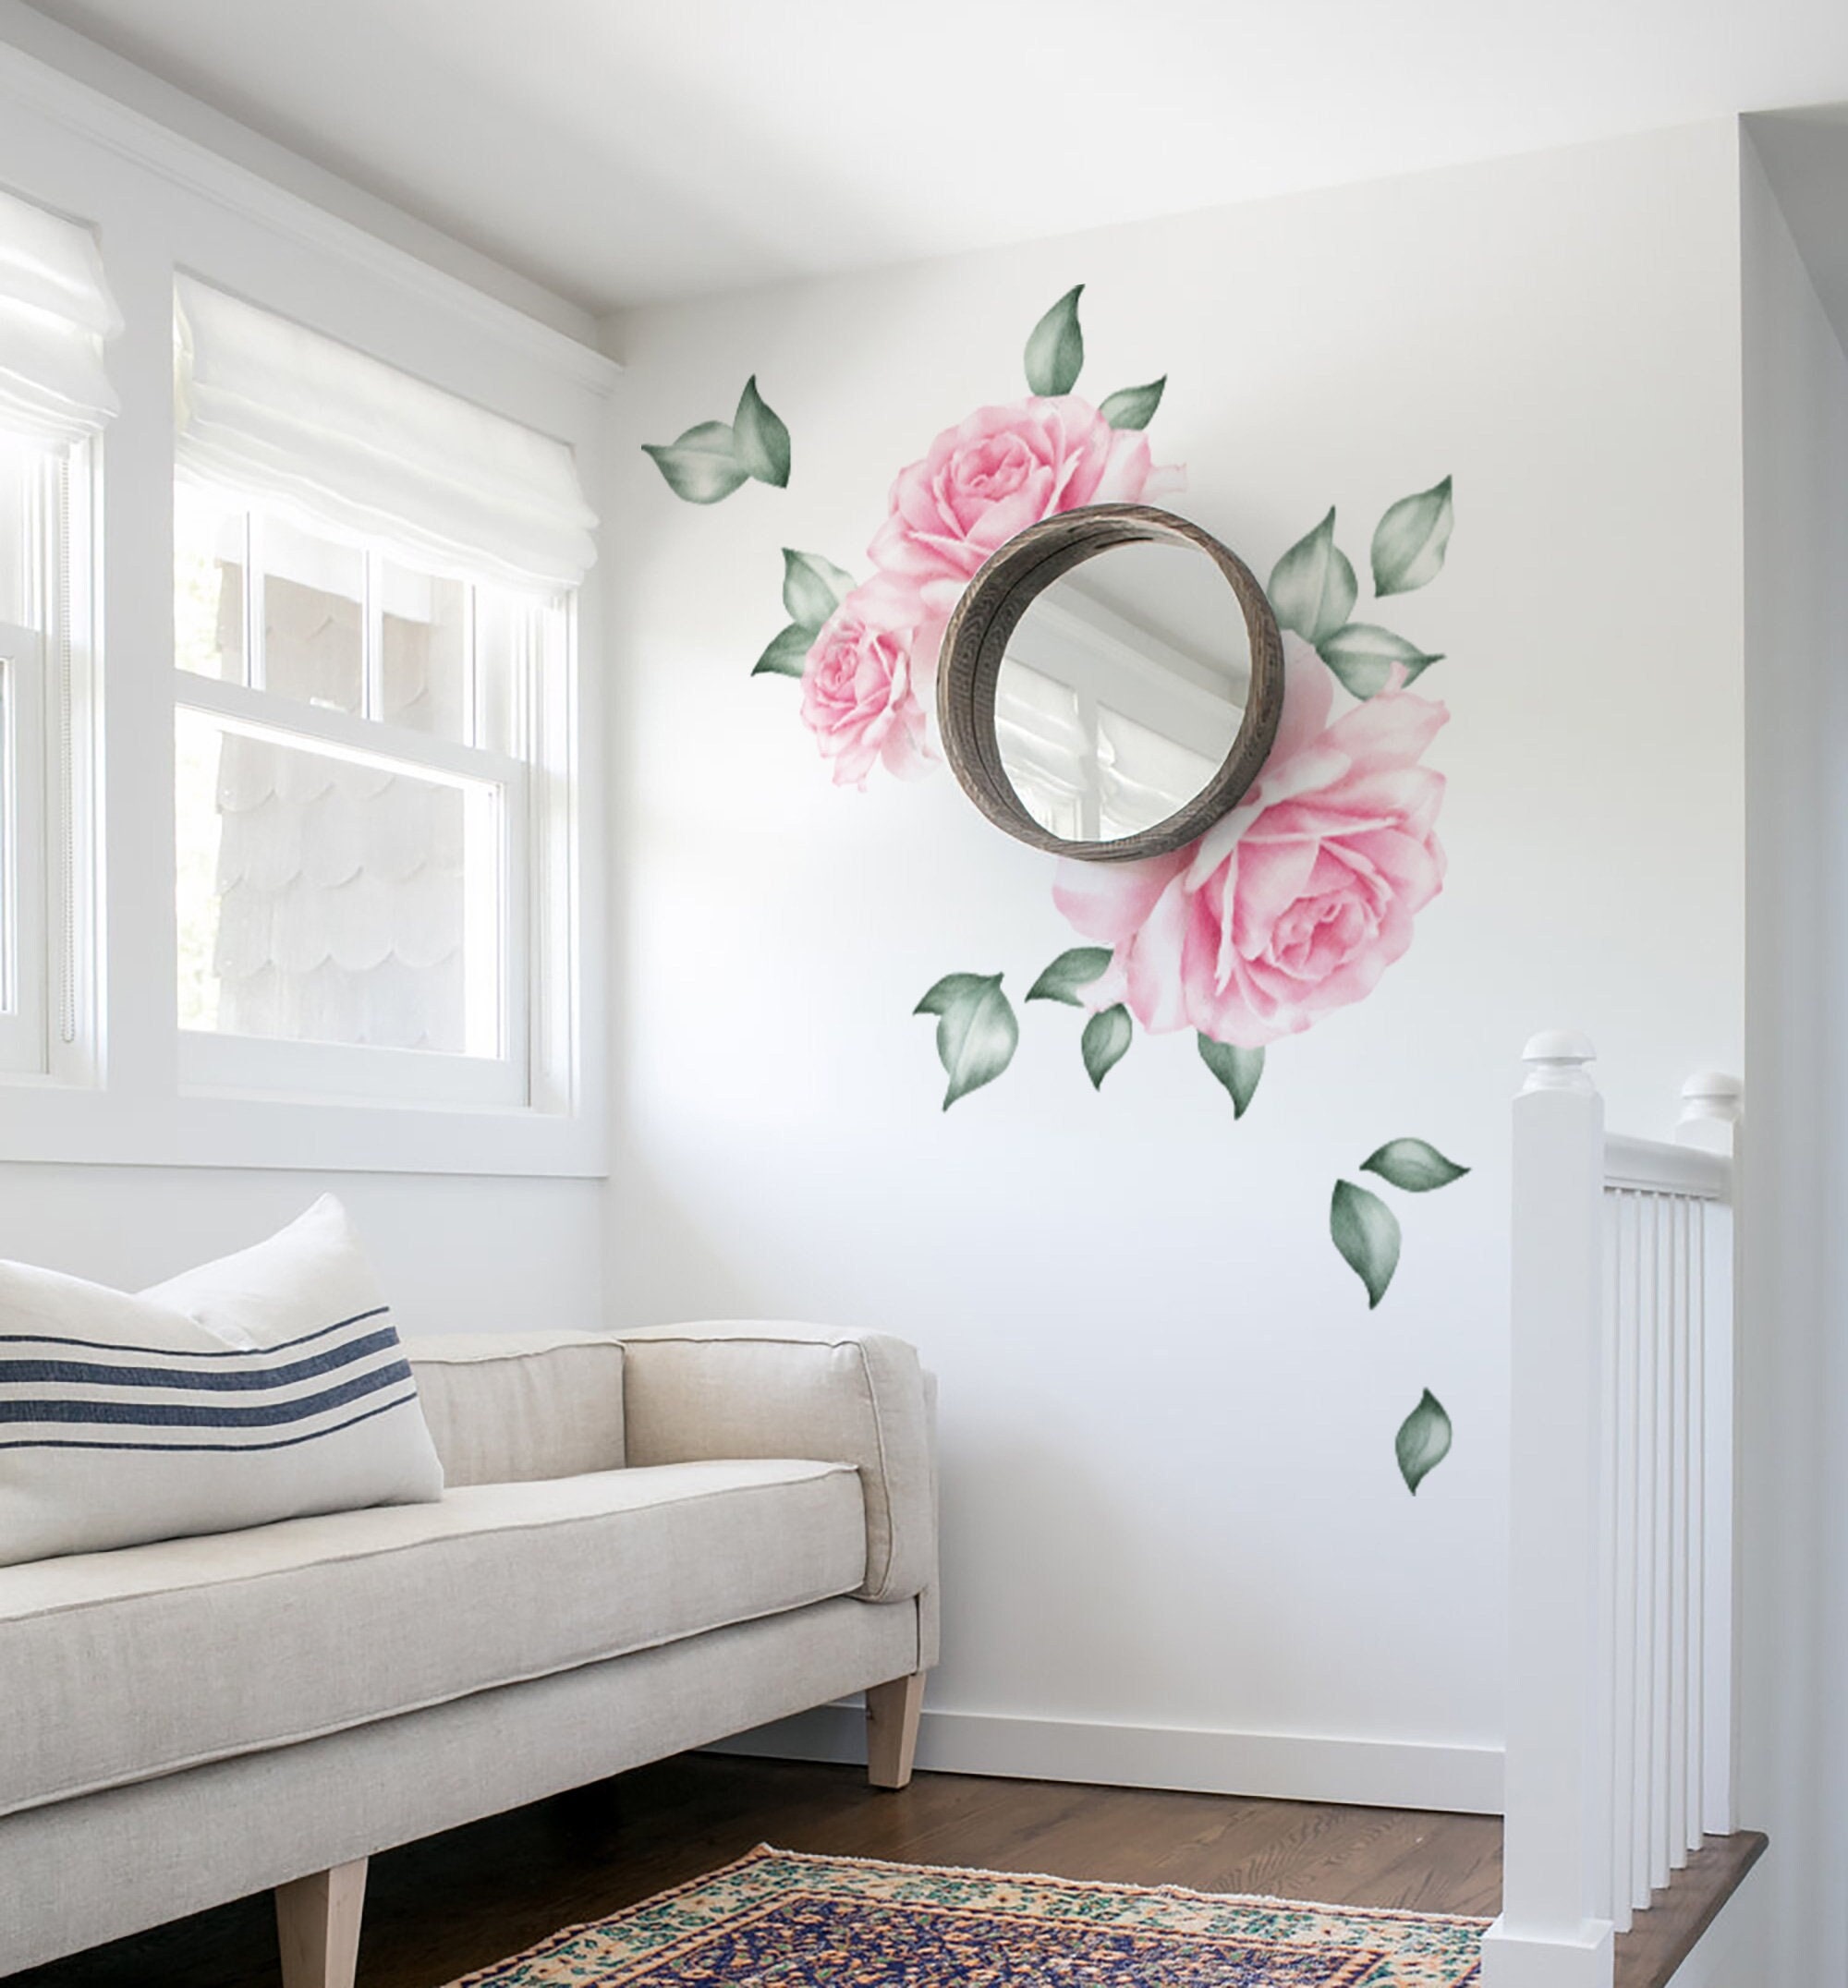 M ACHOOSE Flower Wall Decals Pink Flowers and Birds Wall Sticker Peel and Stick Removable Decal Home Décor Stickers &Murals Wall Decor for Home